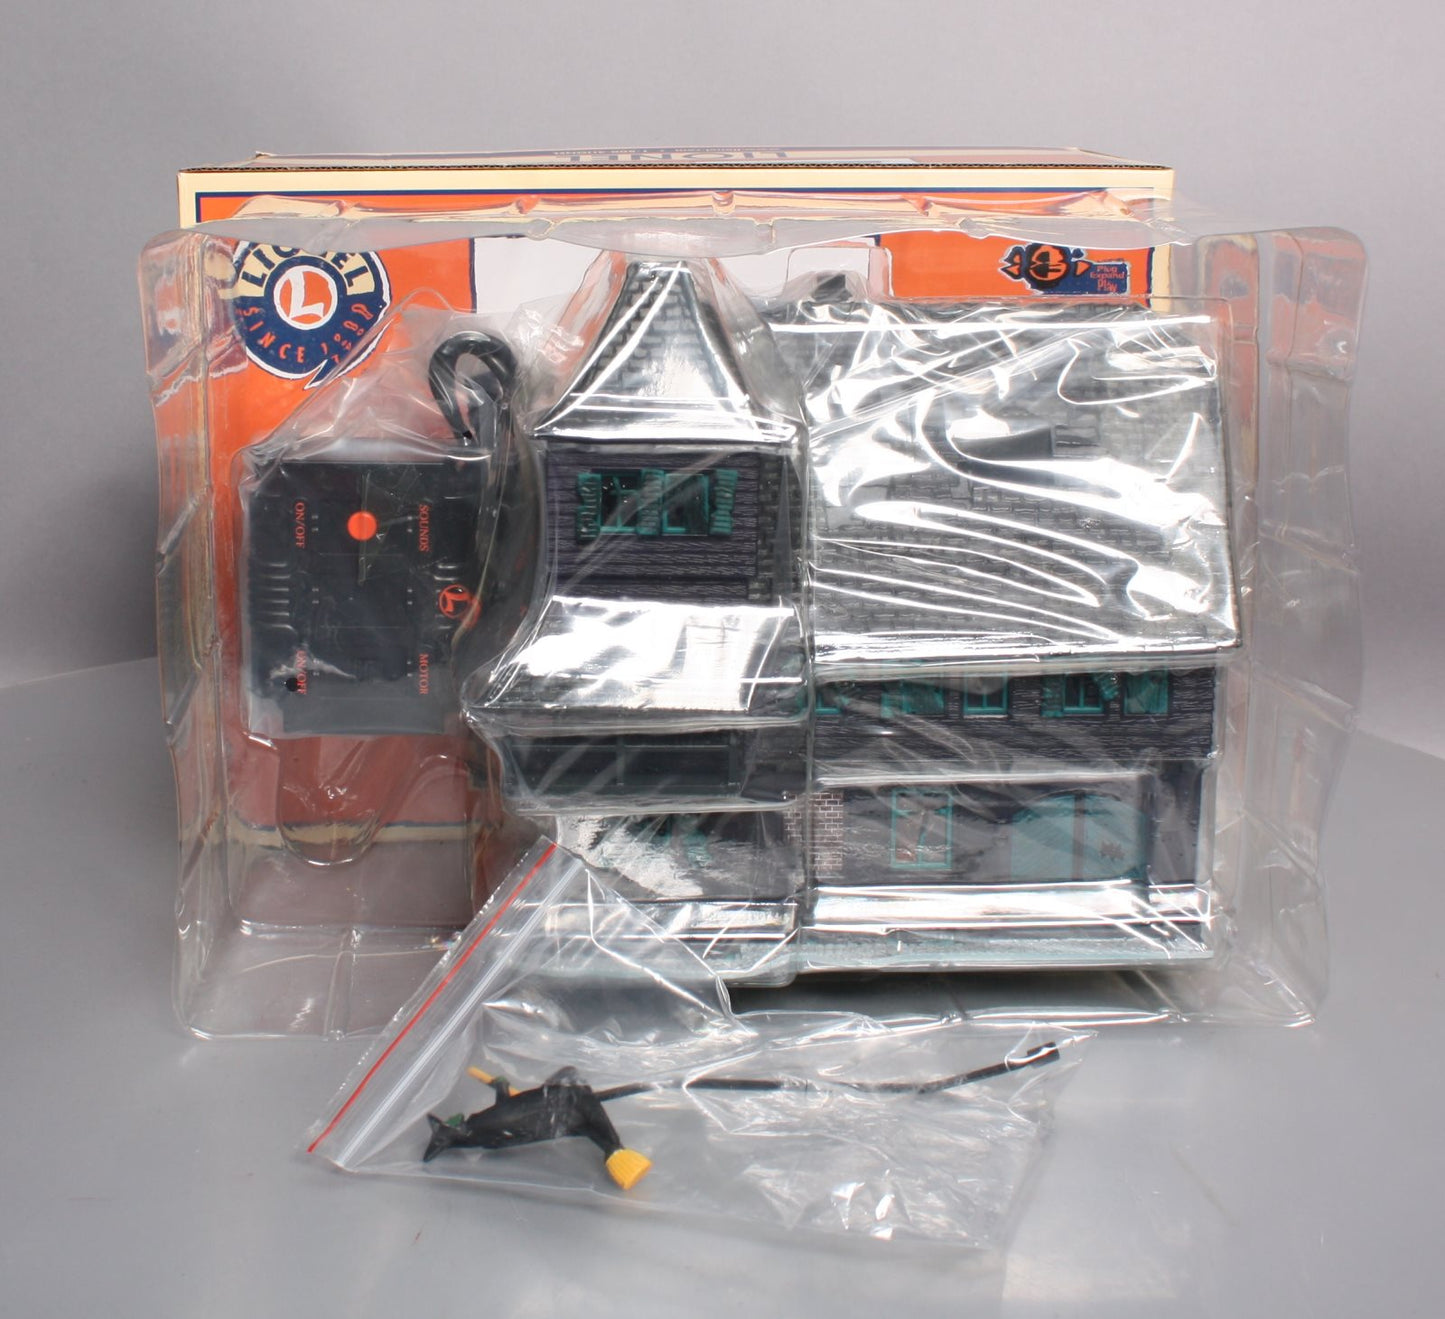 Lionel 1929170 O Plug-Expand-Play Haunted House